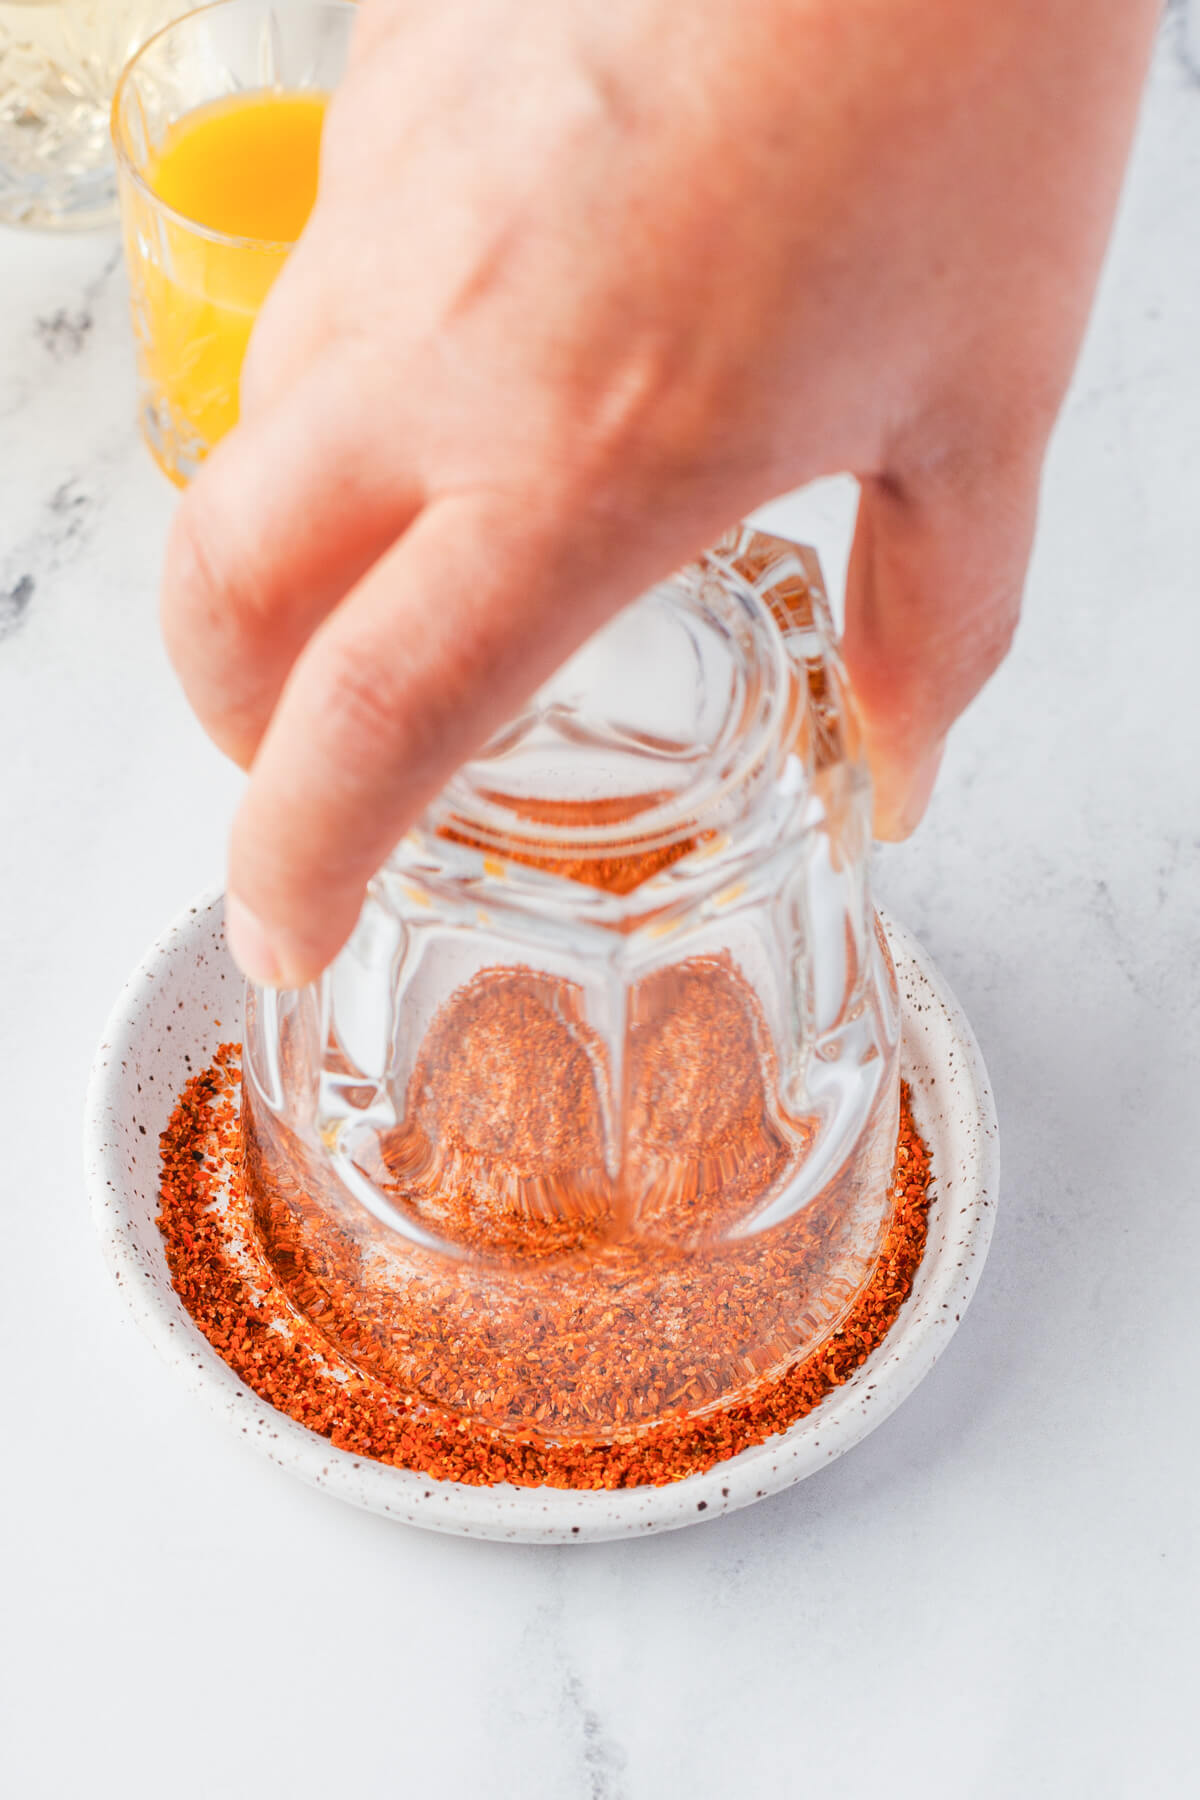 A cocktail glass being dipped in a salt and Tajin seasoning rimmer.